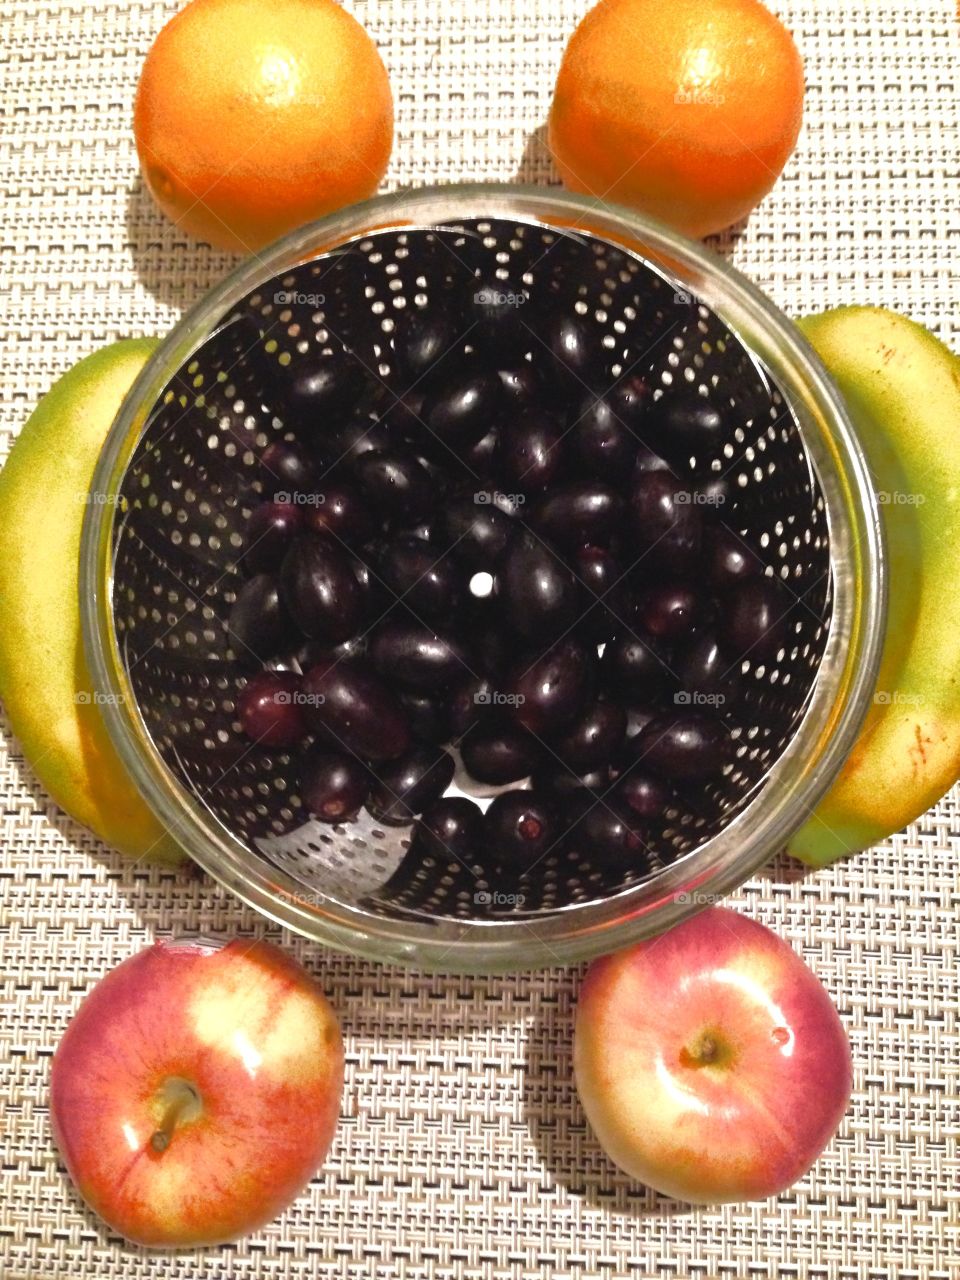 Delicious Black Seedless Grapes

Published by:
HappyBrownMonkey 